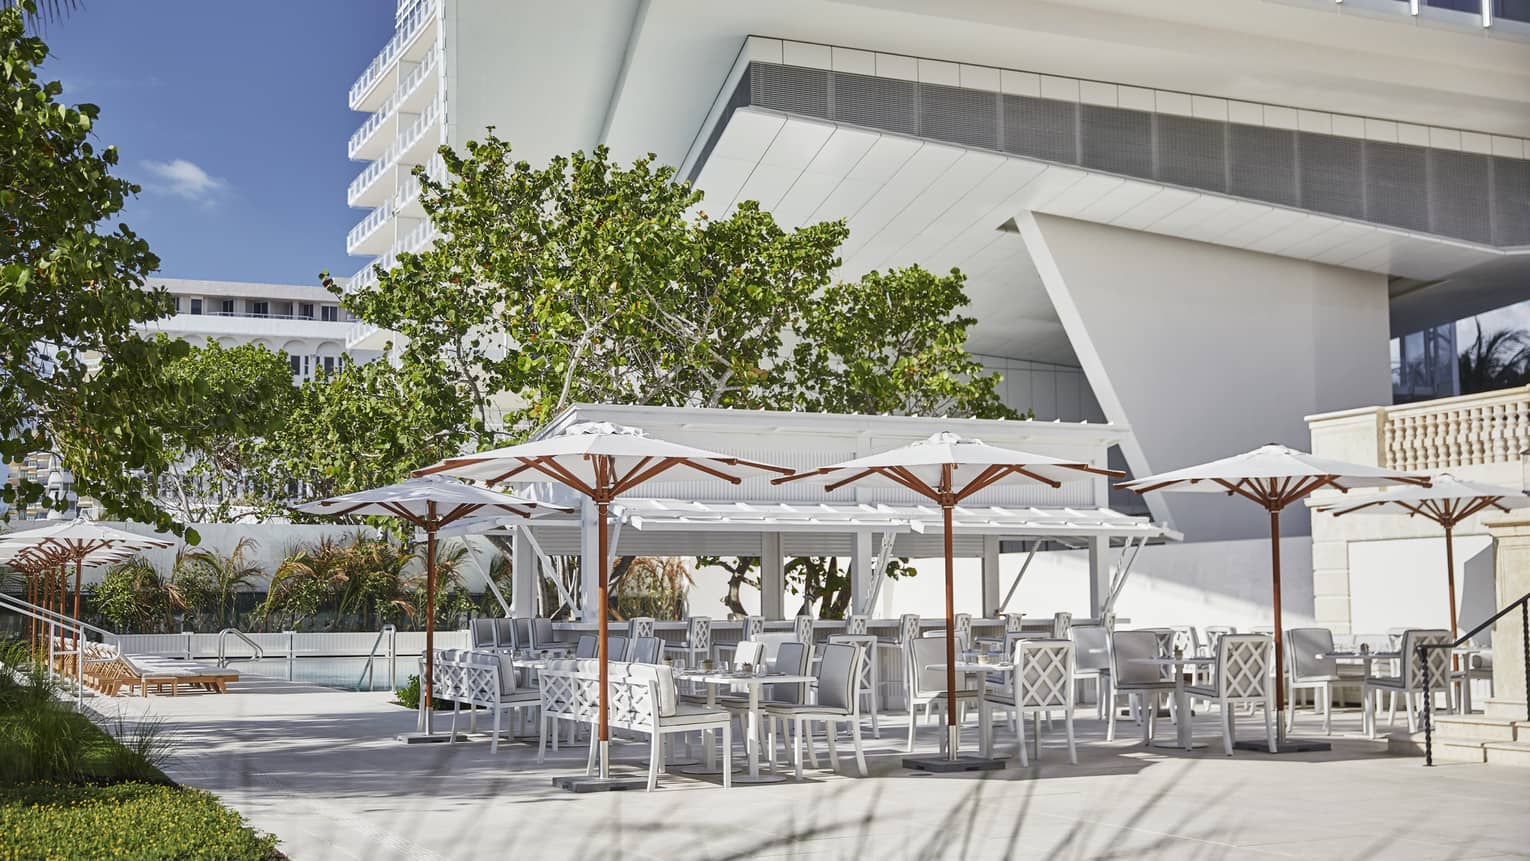 A large outdoor seating area of white chairs and tables covered with white umbrellas.